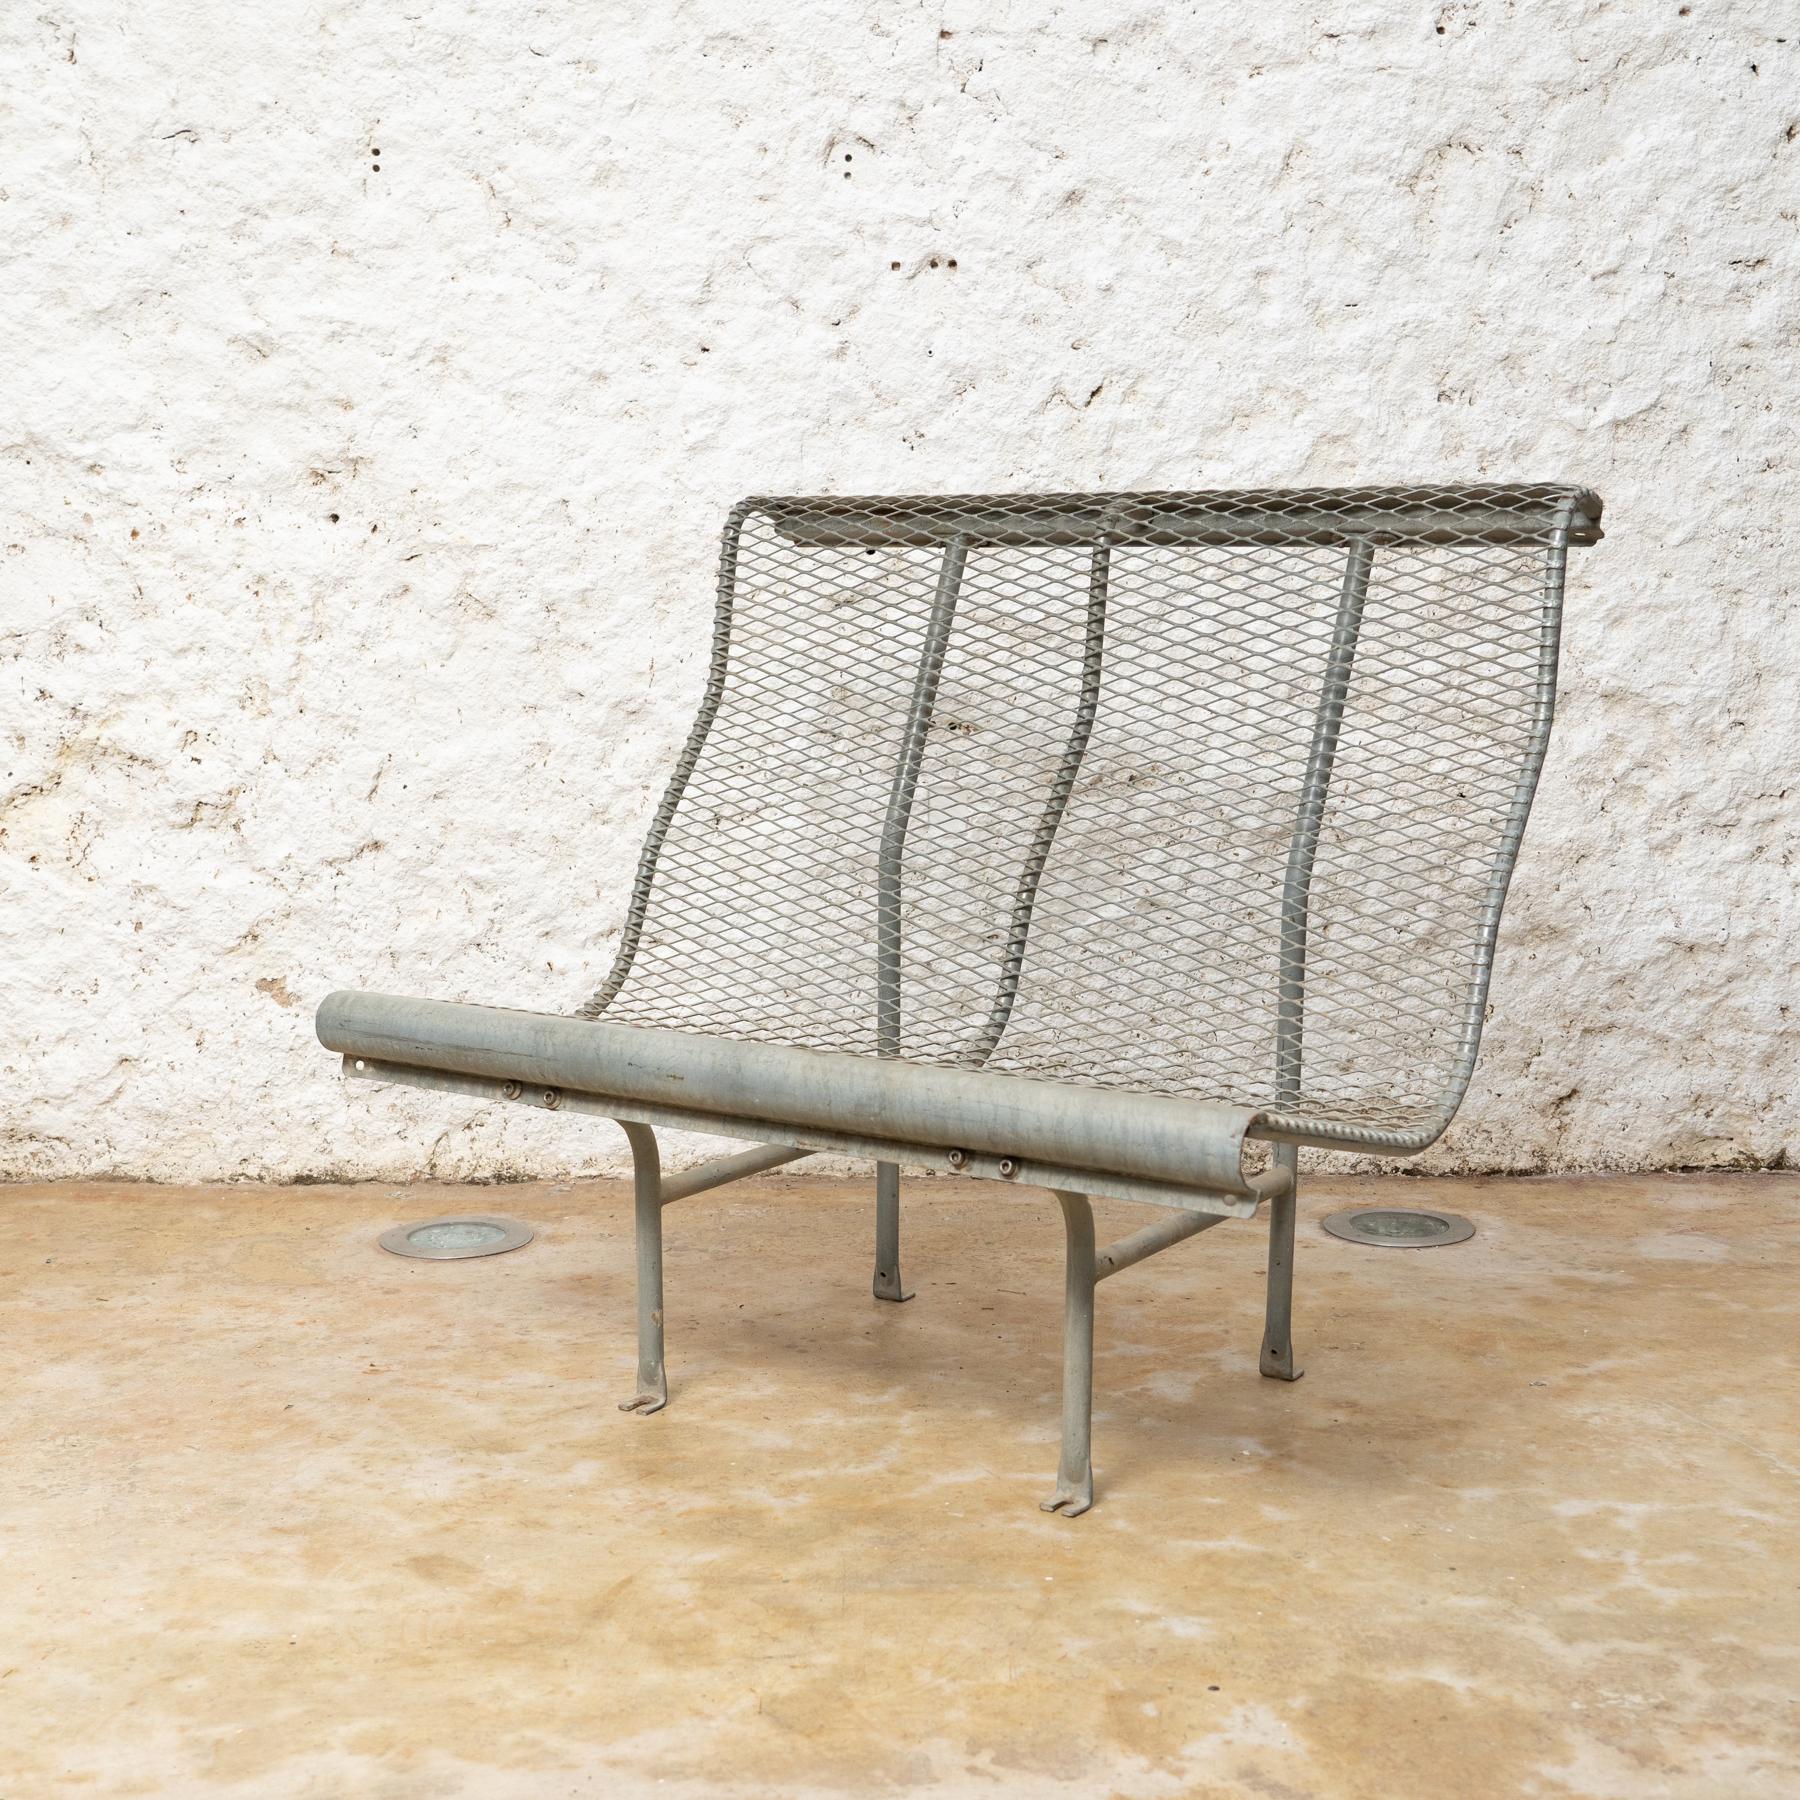 Metal Bench Version “Perforano” by Oscar Tusquets for BD Barcelona, circa 1980 For Sale 2